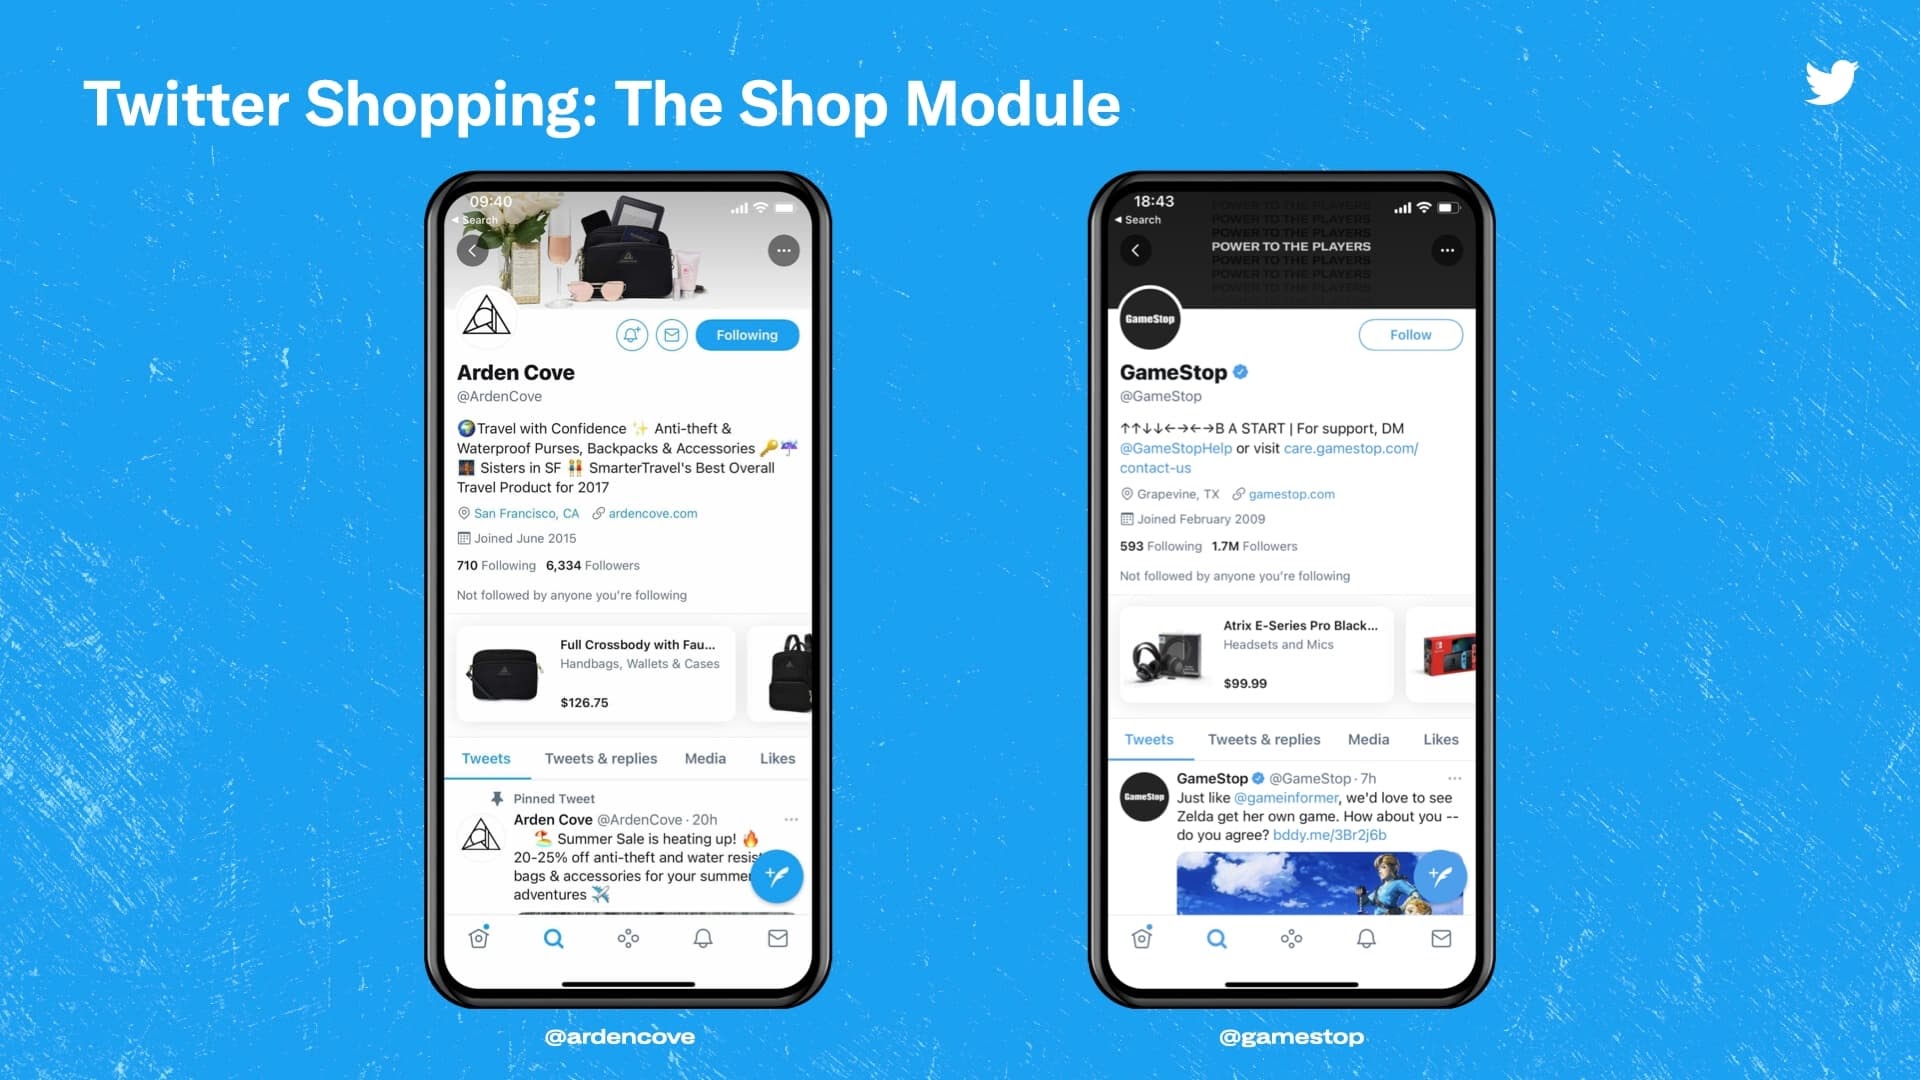 Twitter's announcement of The Shop Module